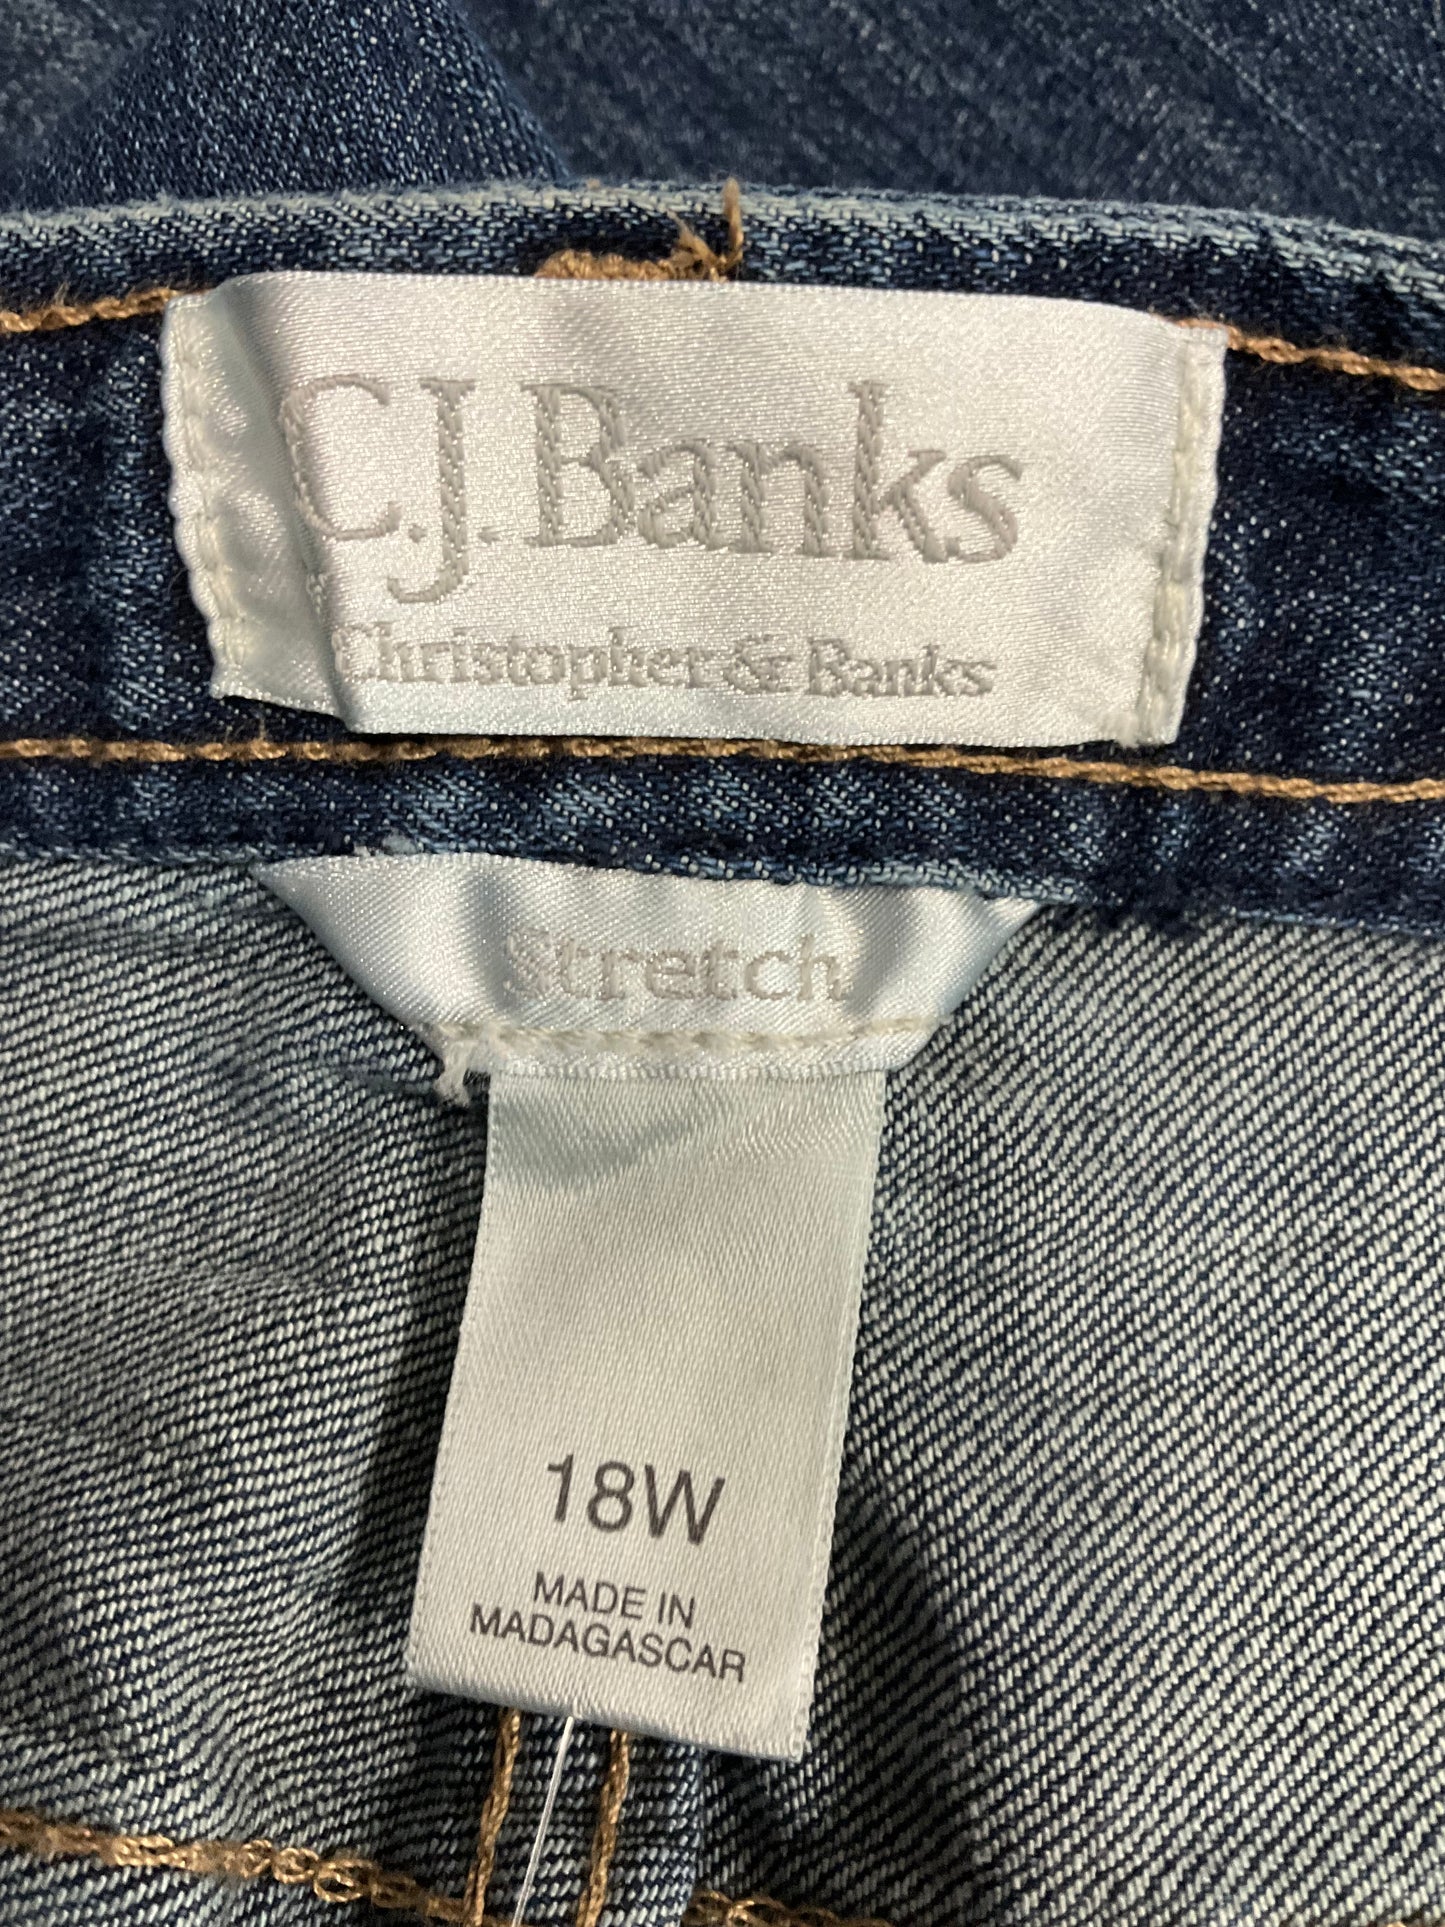 Jeans Straight By Cj Banks  Size: 18